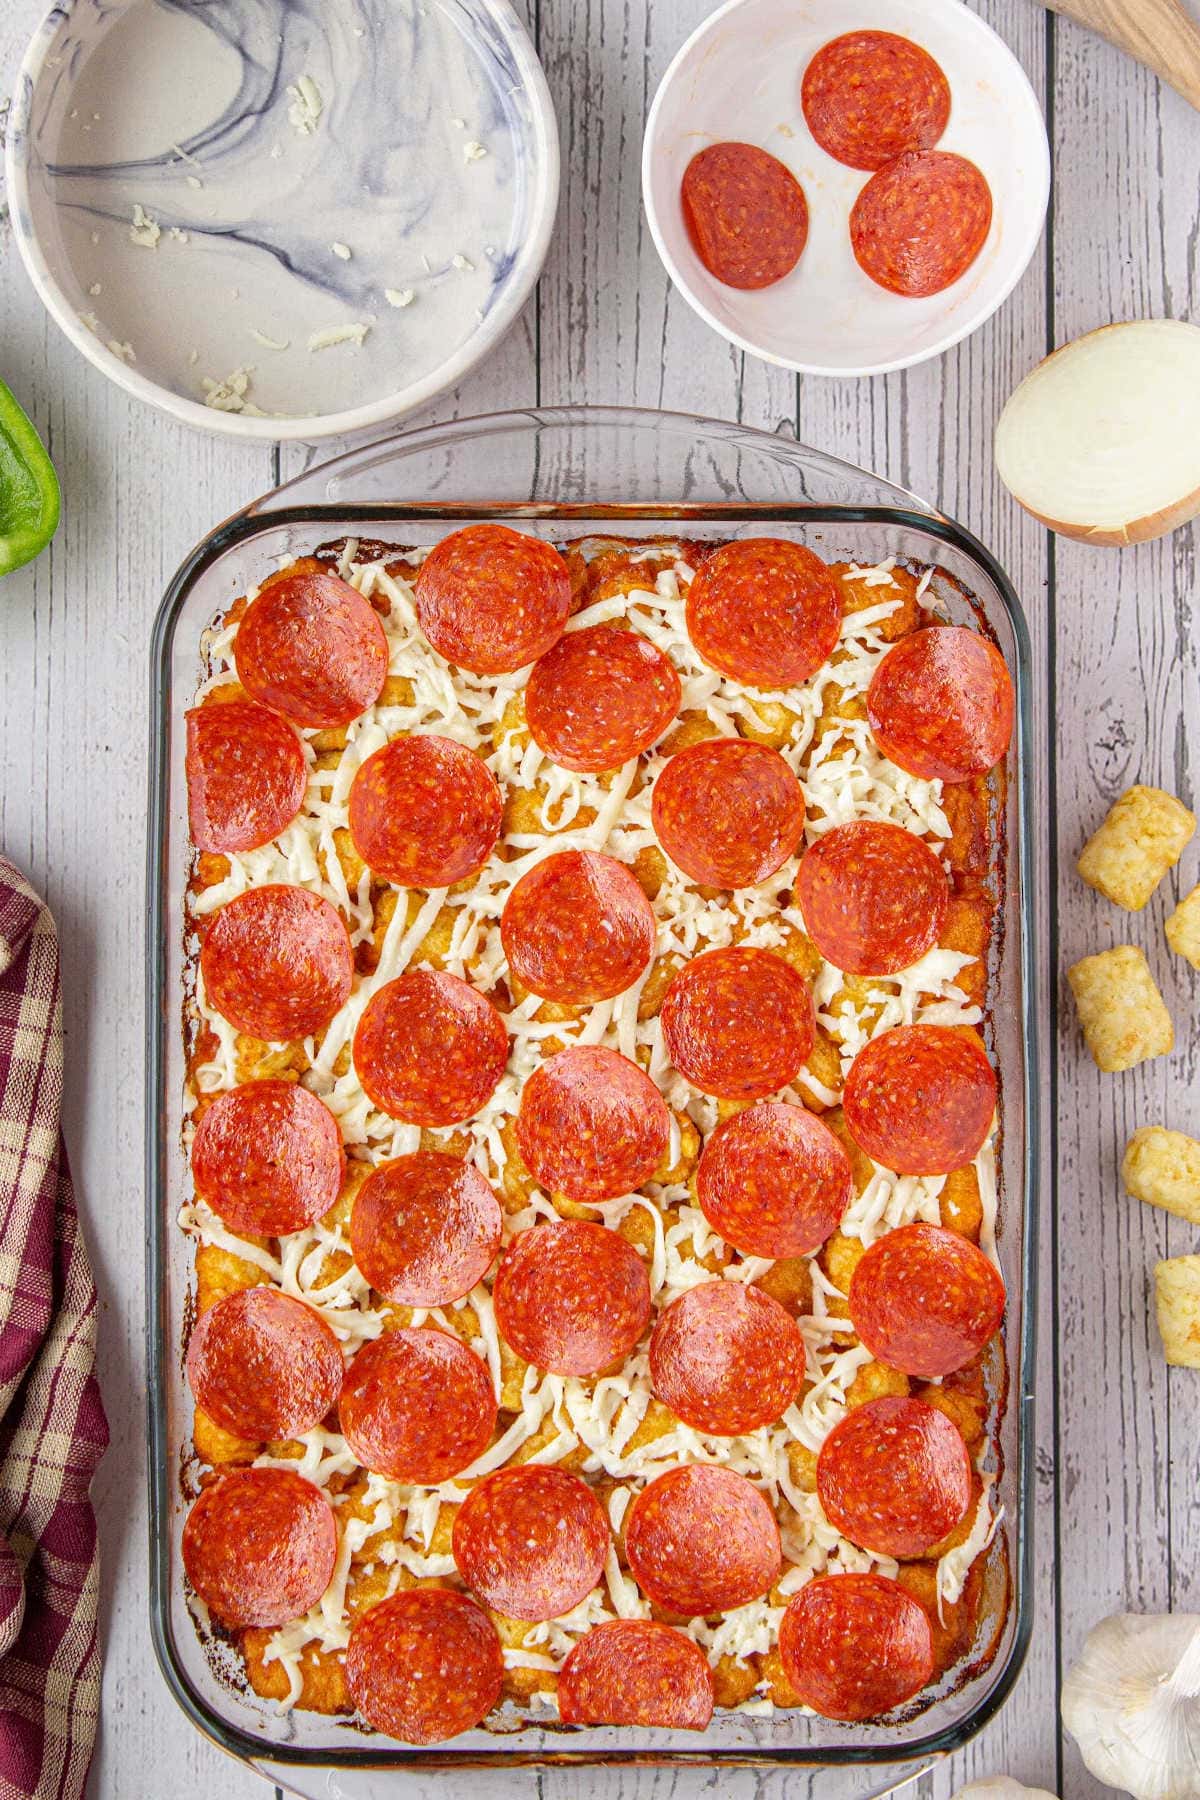 Finished casserole with cheese and pepperoni on top.